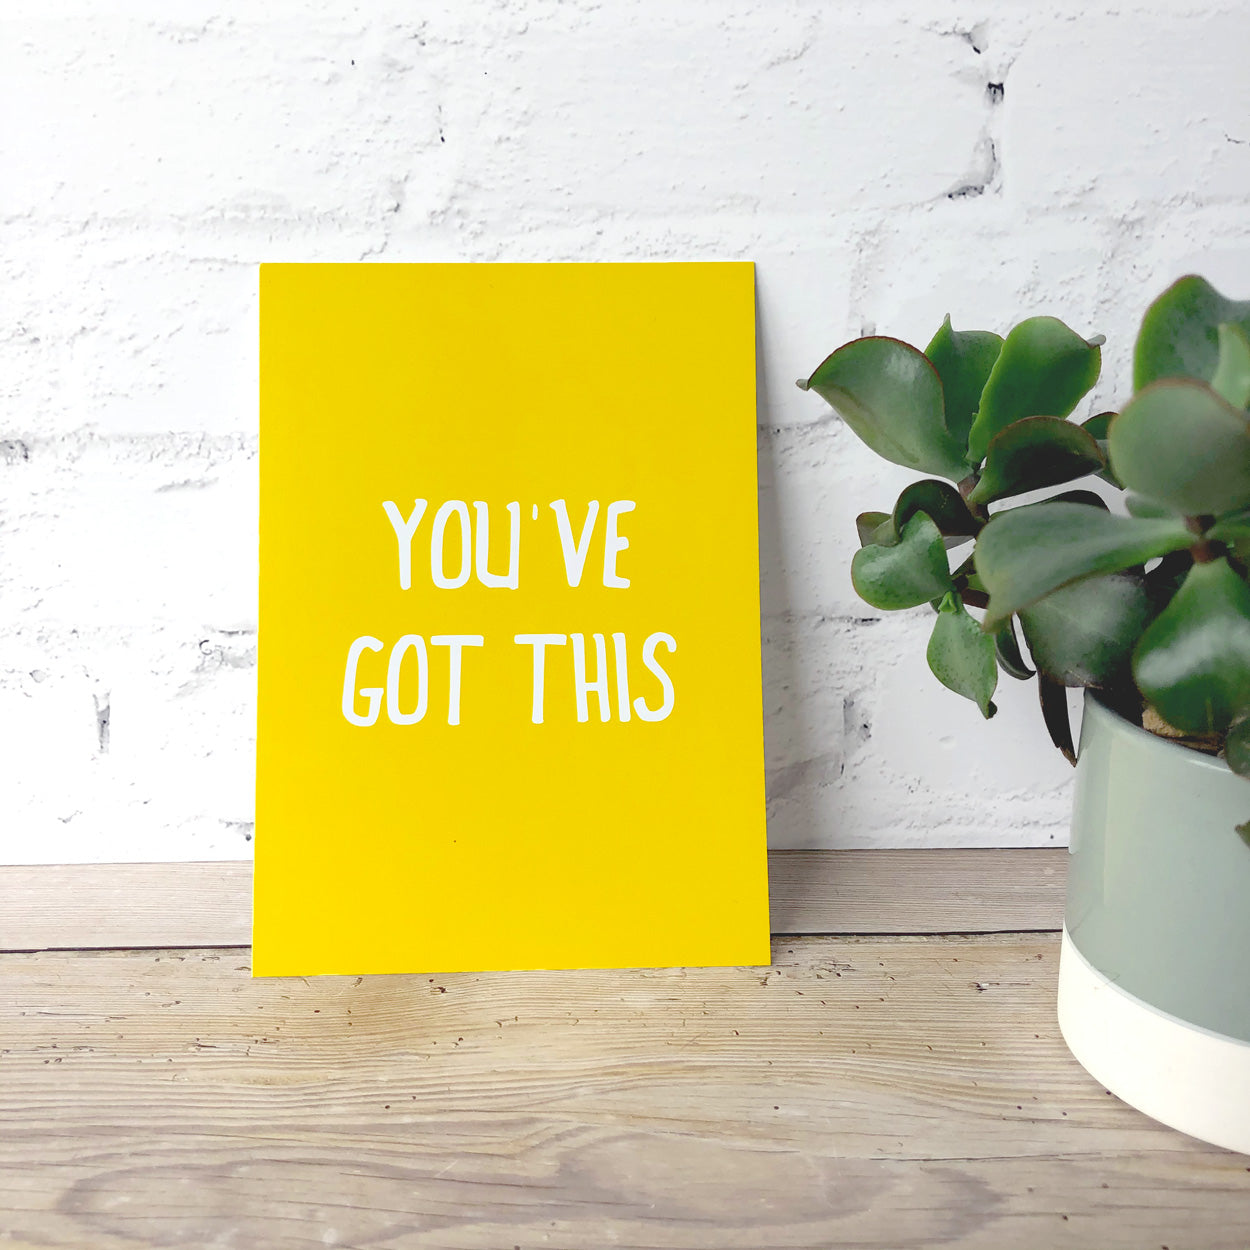 You've Got This | Encouraging Postcard